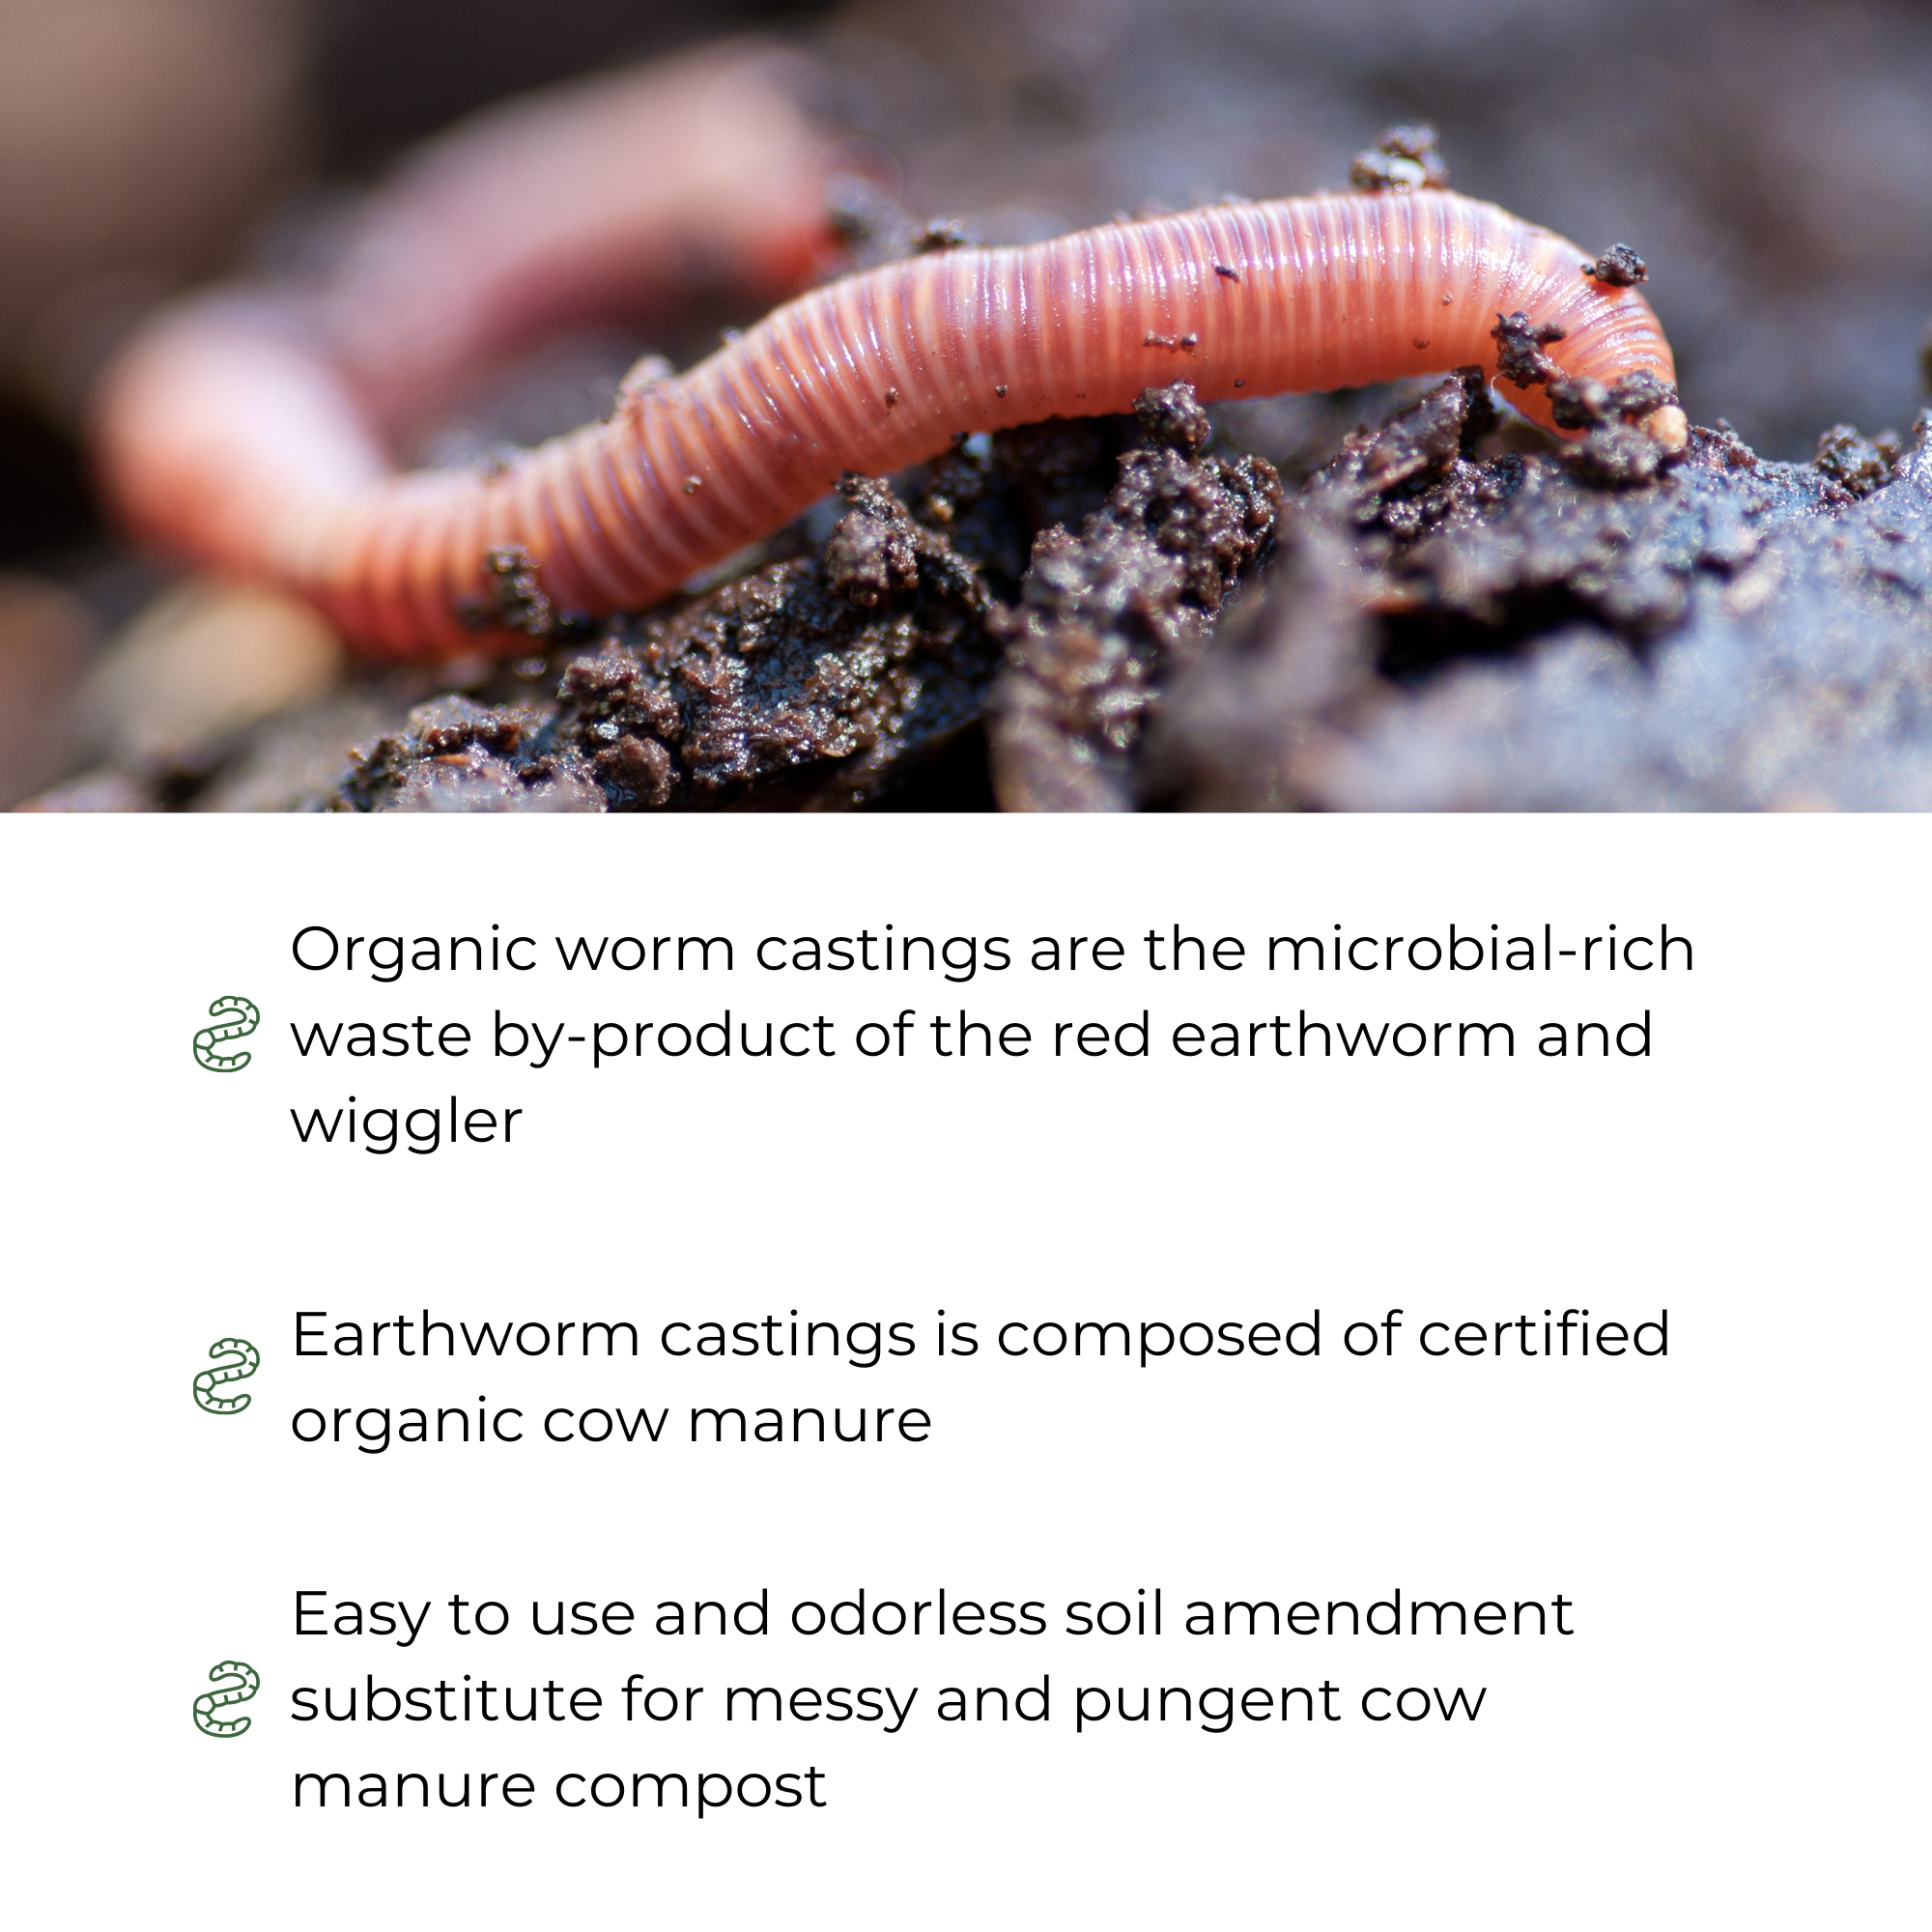 Earth Worm Castings – Organic Red Worm Compost Soil Amendment - .13 cubic foot - Approximately 1 Gallon - 6 Lbs - Organic Red Worm Vermiculture and Compost Home, Garden, Greenhouse, and Farm - image 3 of 7